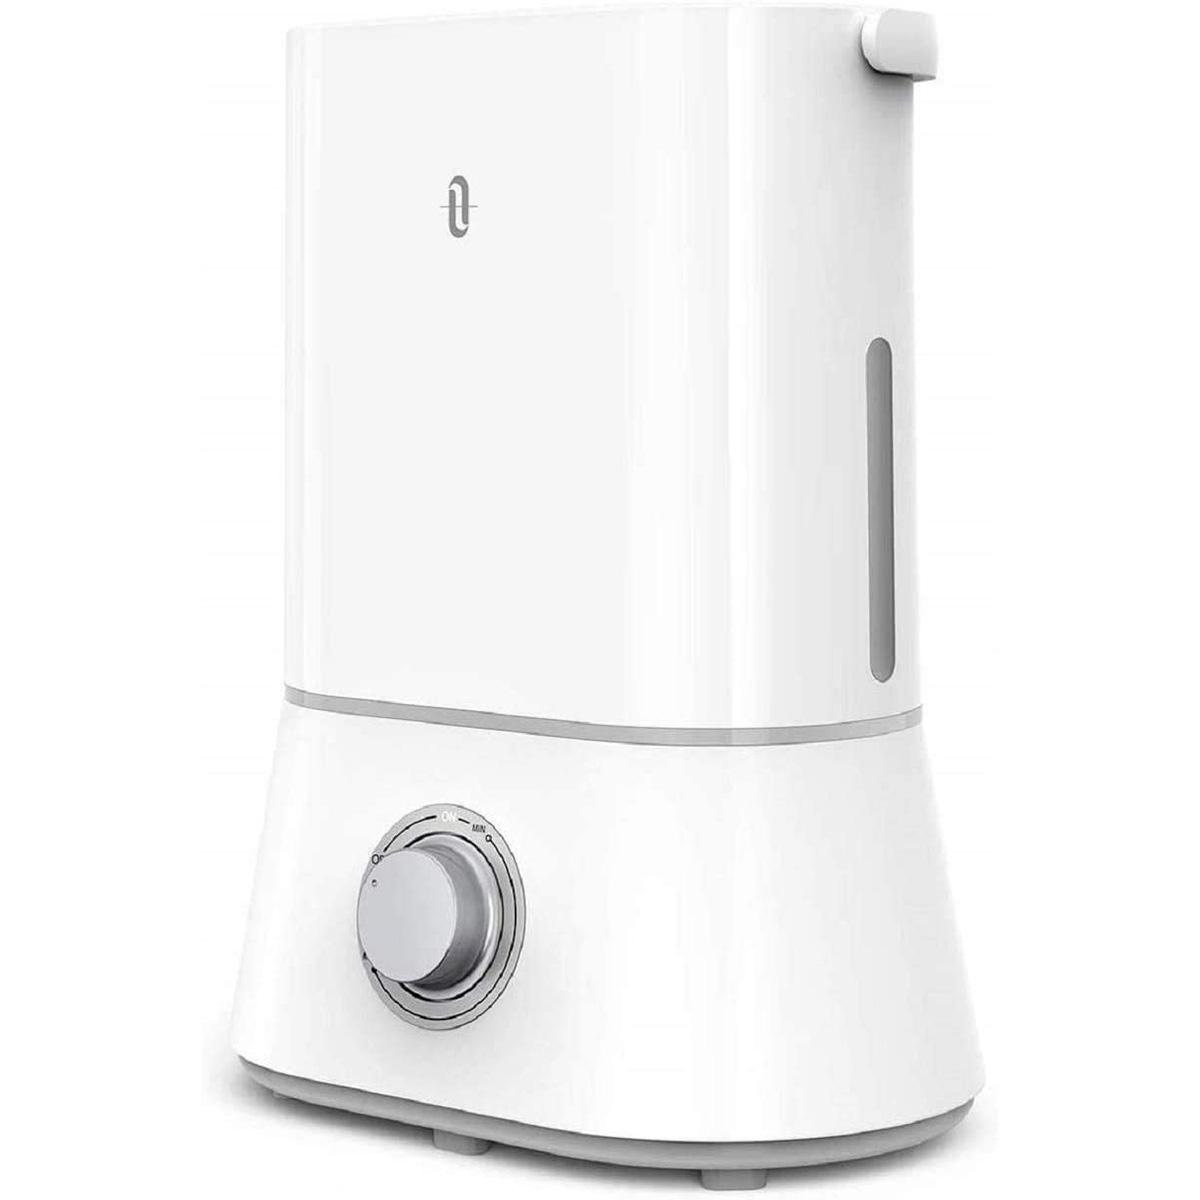 TaoTronics AH024 4-Liter Cool Mist Humidifier for $24.99 Shipped